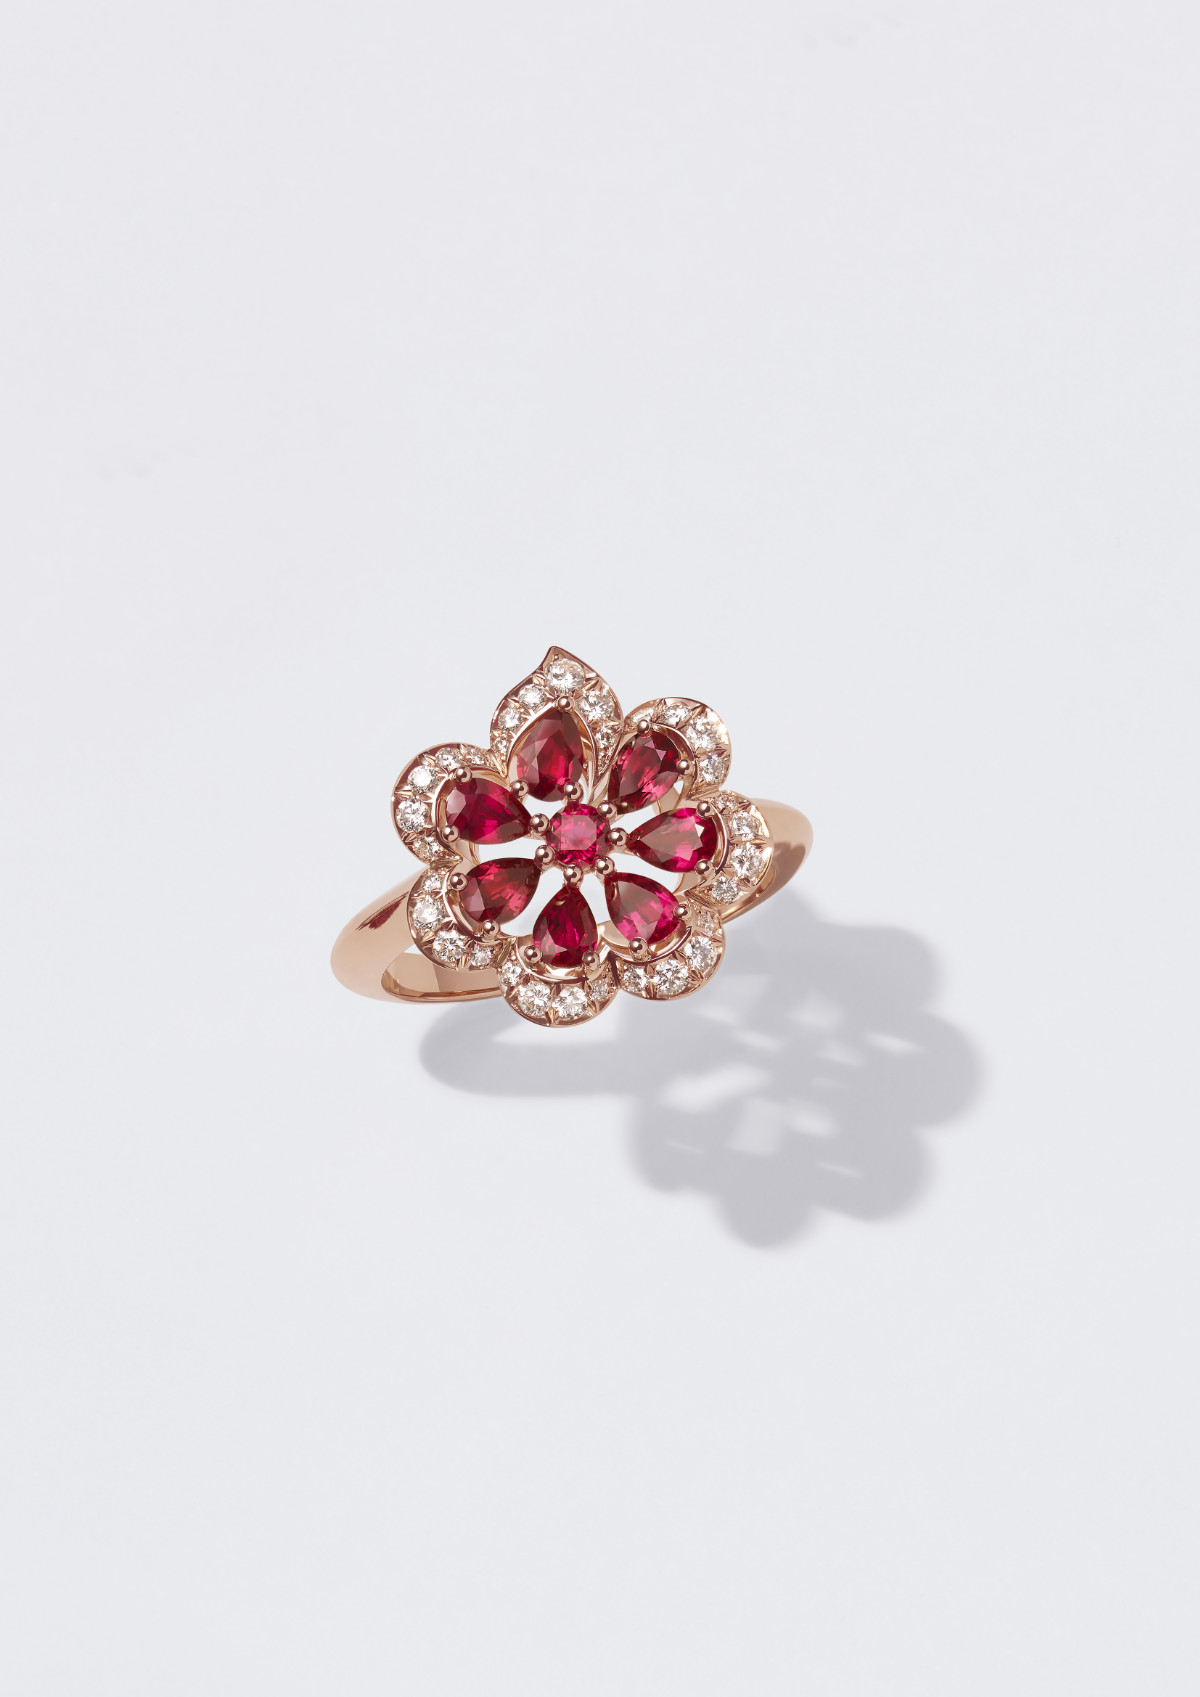 Precious Lace: Rubies Make A Majestic Entrance Into Chopard’s Creative Jewellery Collection